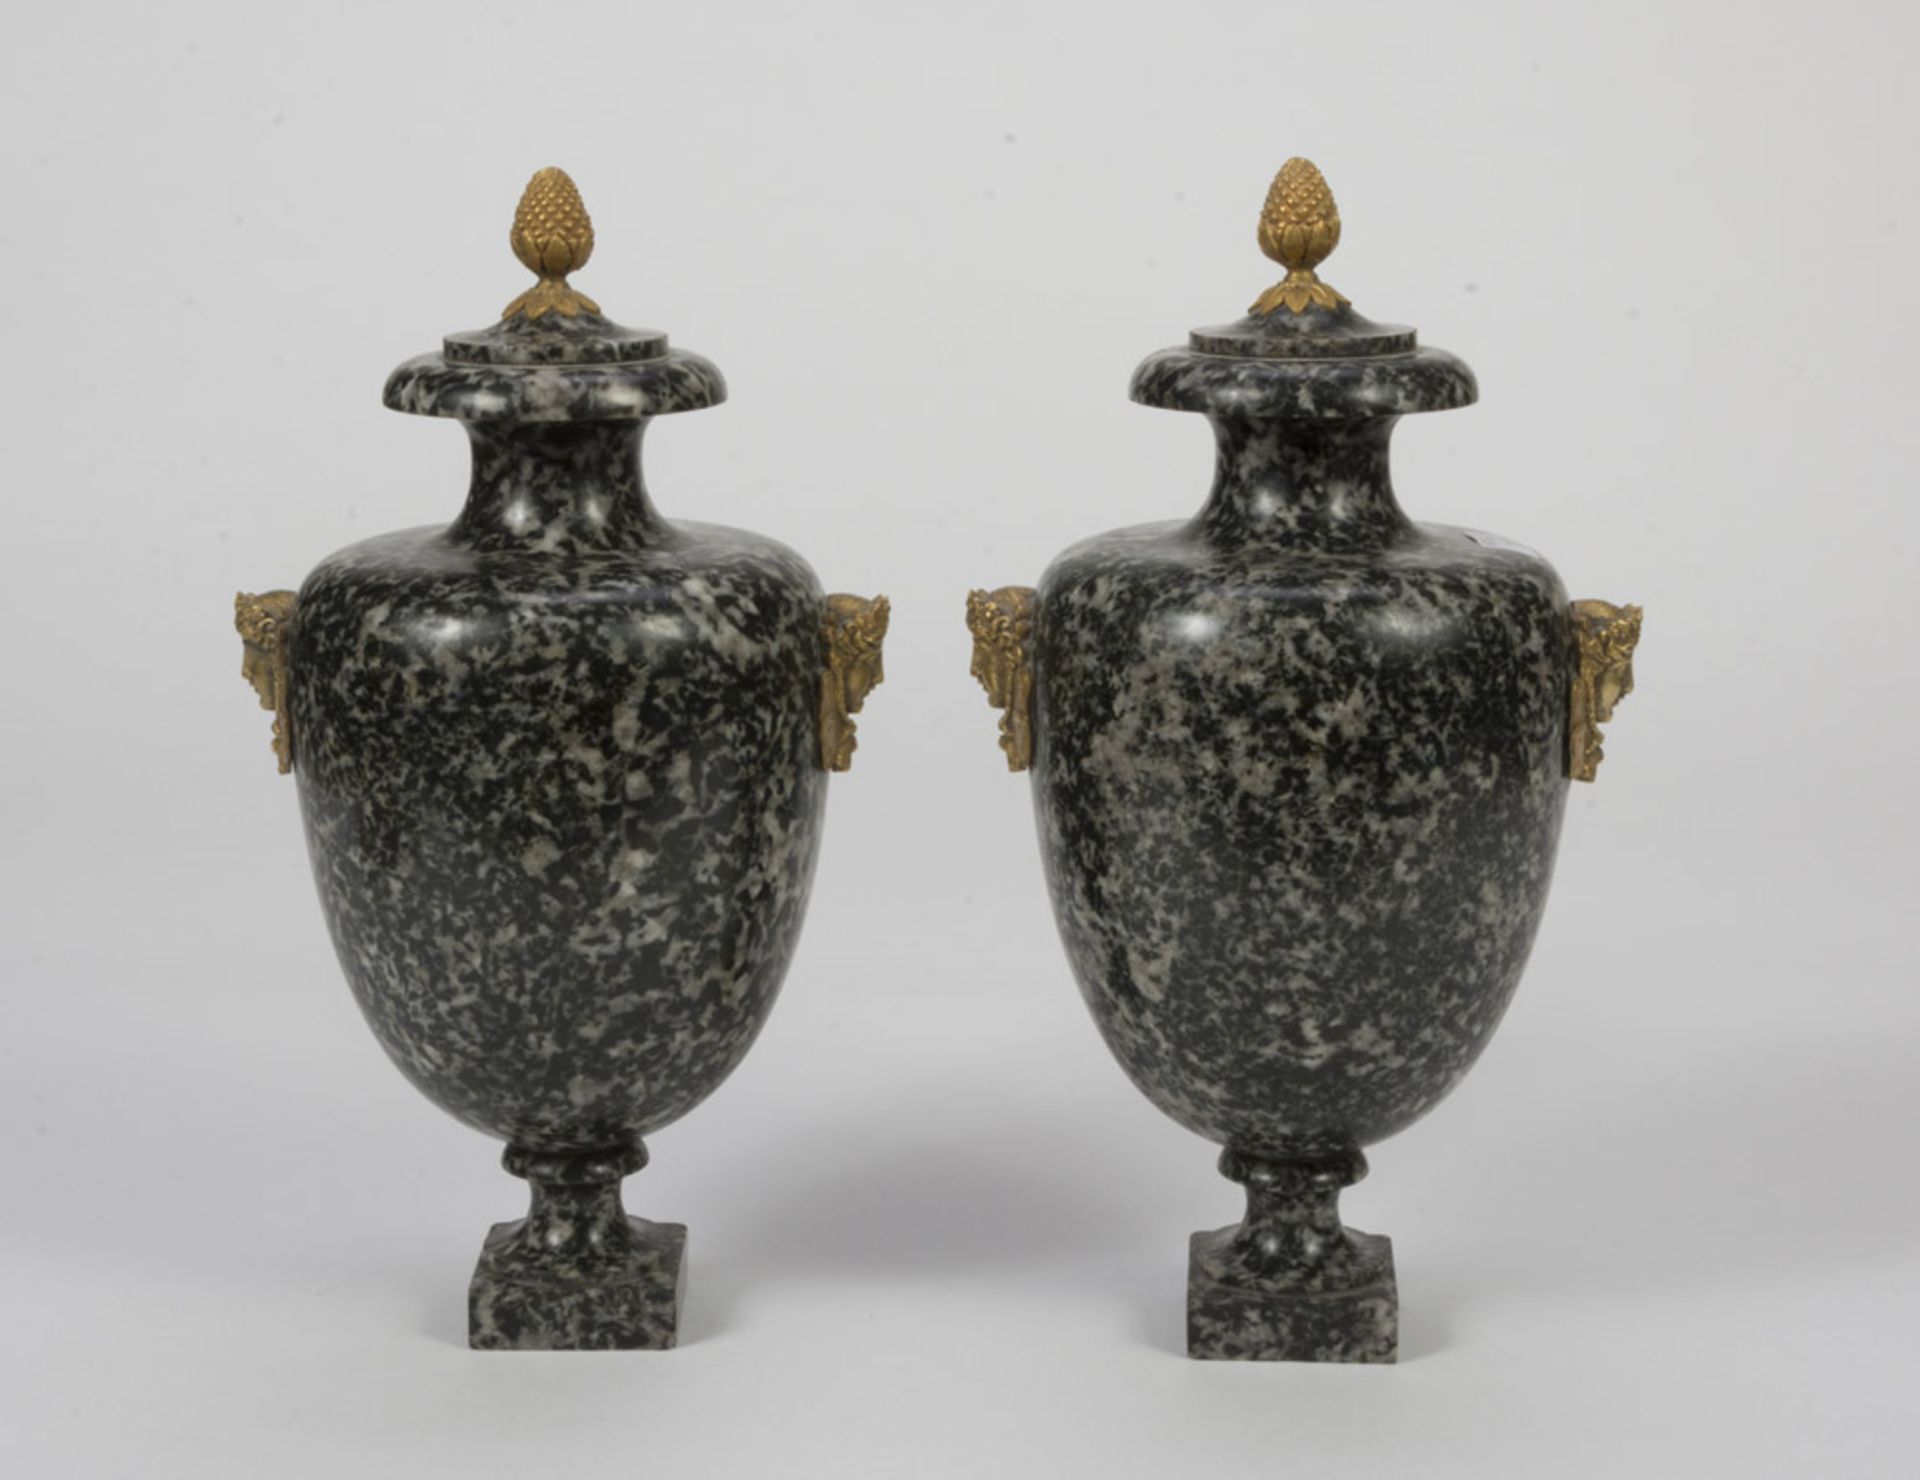 SPLENDID PAIR OF CASSOLETTES IN EGYPTIAN GRANITE, NEOCLASSICAL PERIOD with baluster body, handles